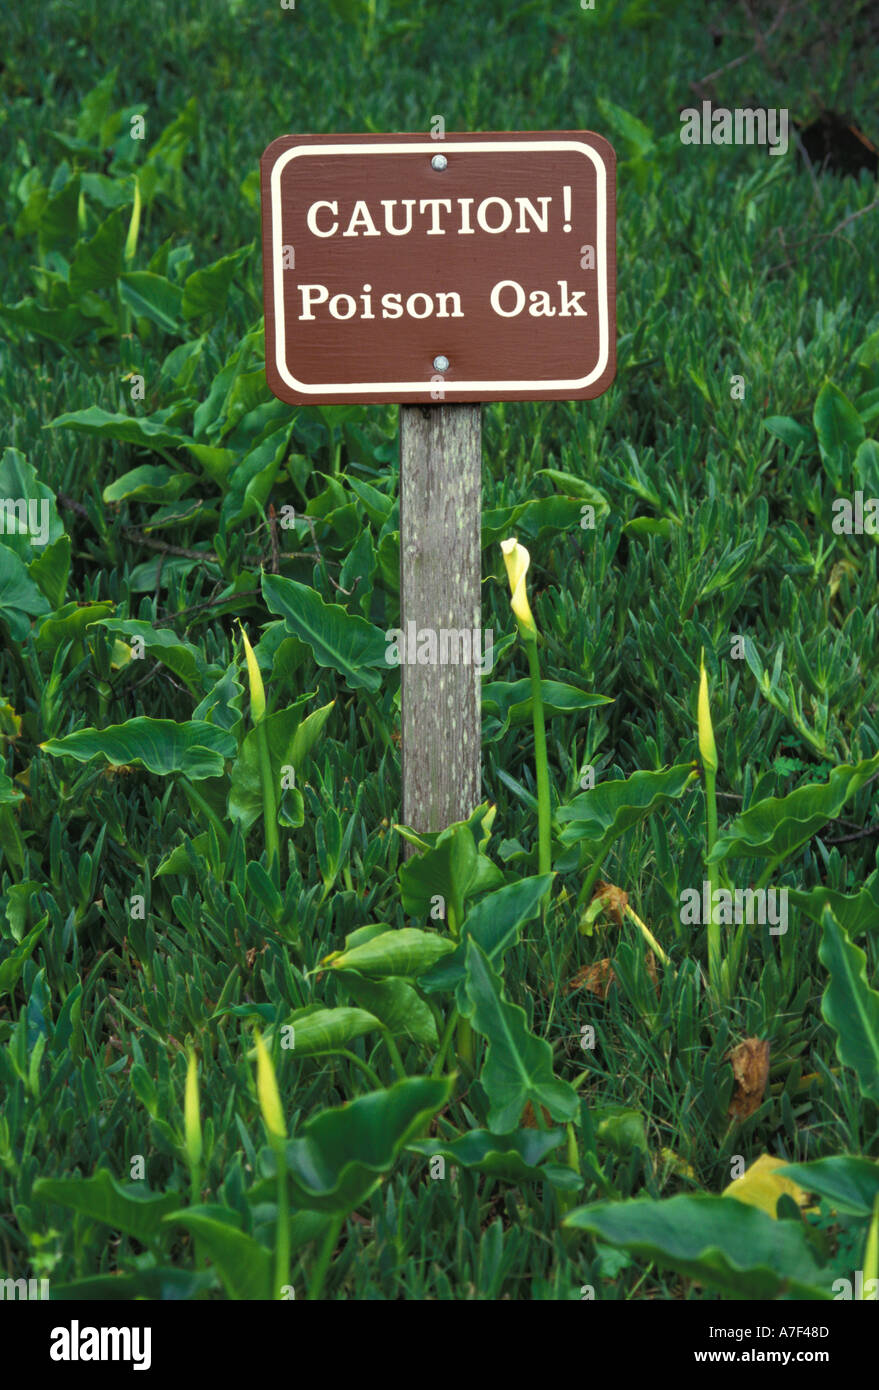 CAUTION Poison Oak small wooden sign surrounded by green plants and grass Stock Photo